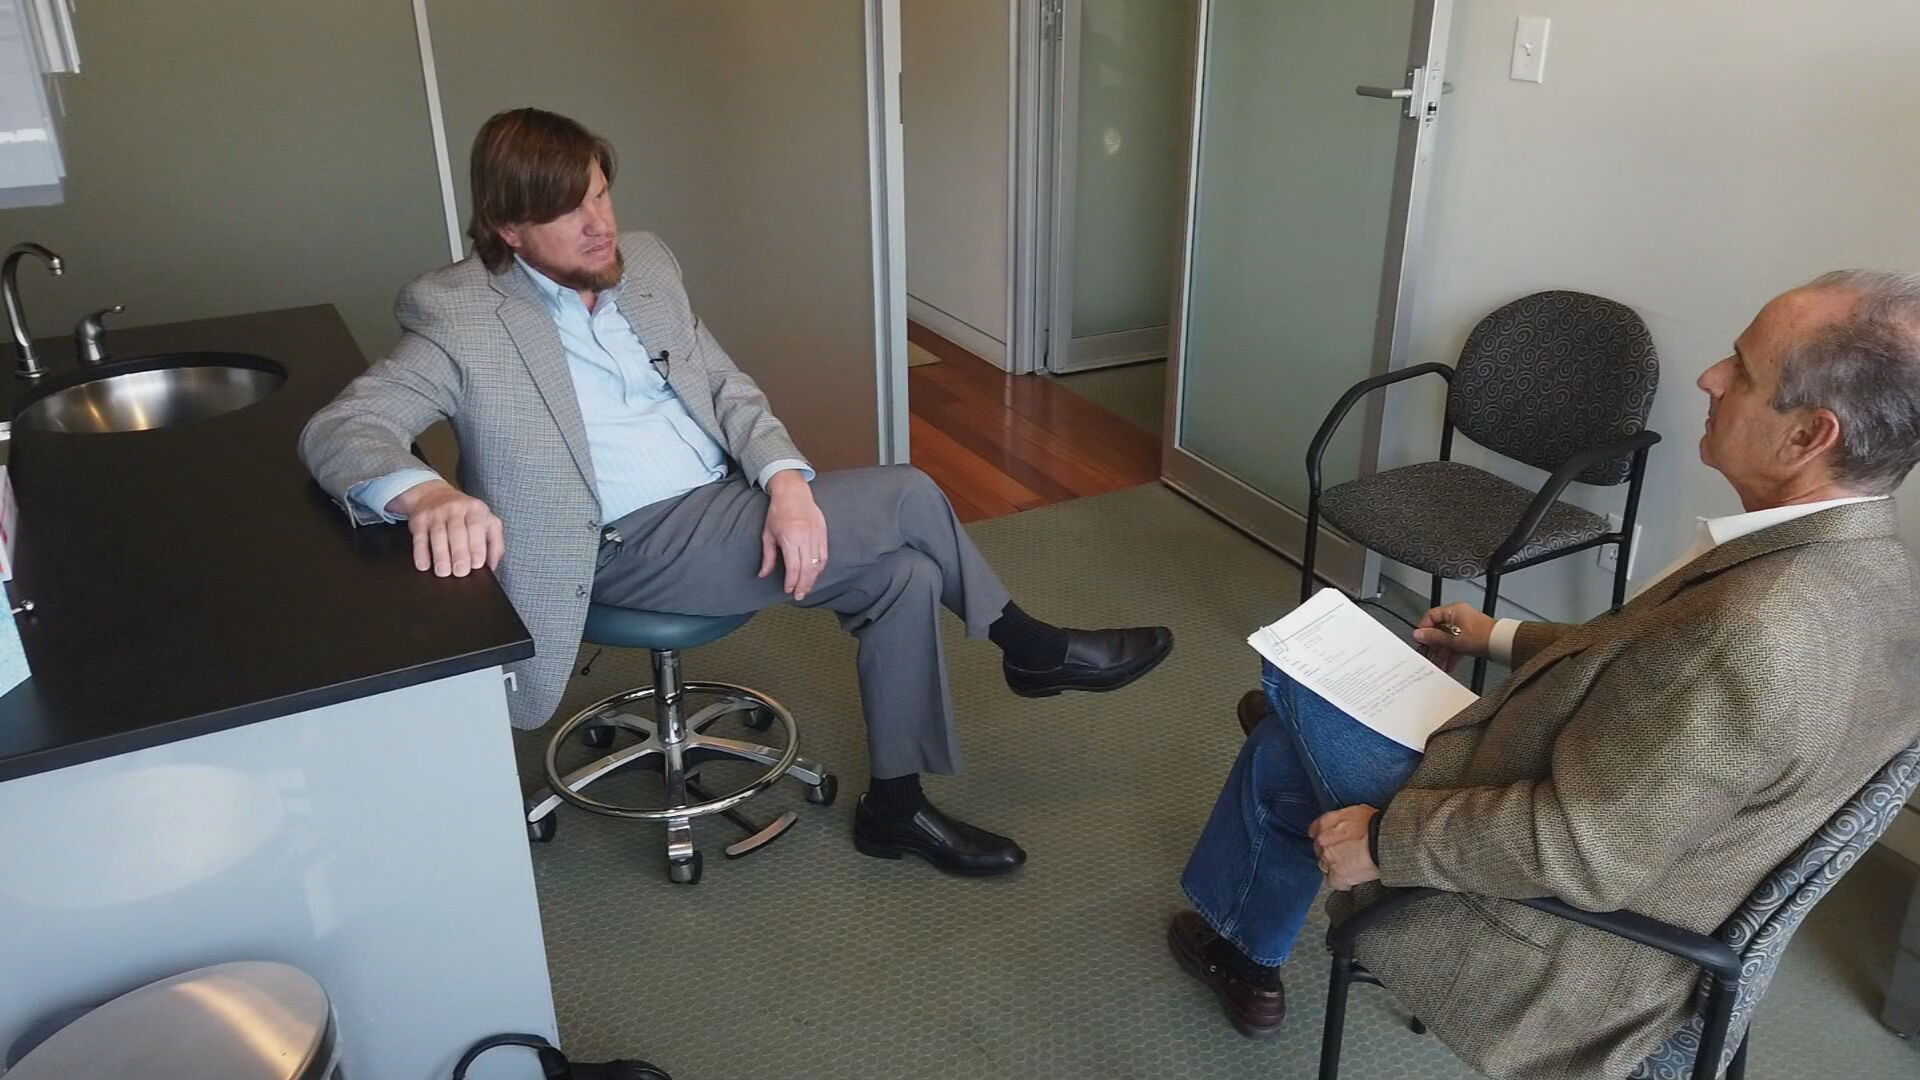 CBS4 Investigator Brian Maass speaking with Dr. Brian Willoughby (credit: CBS)